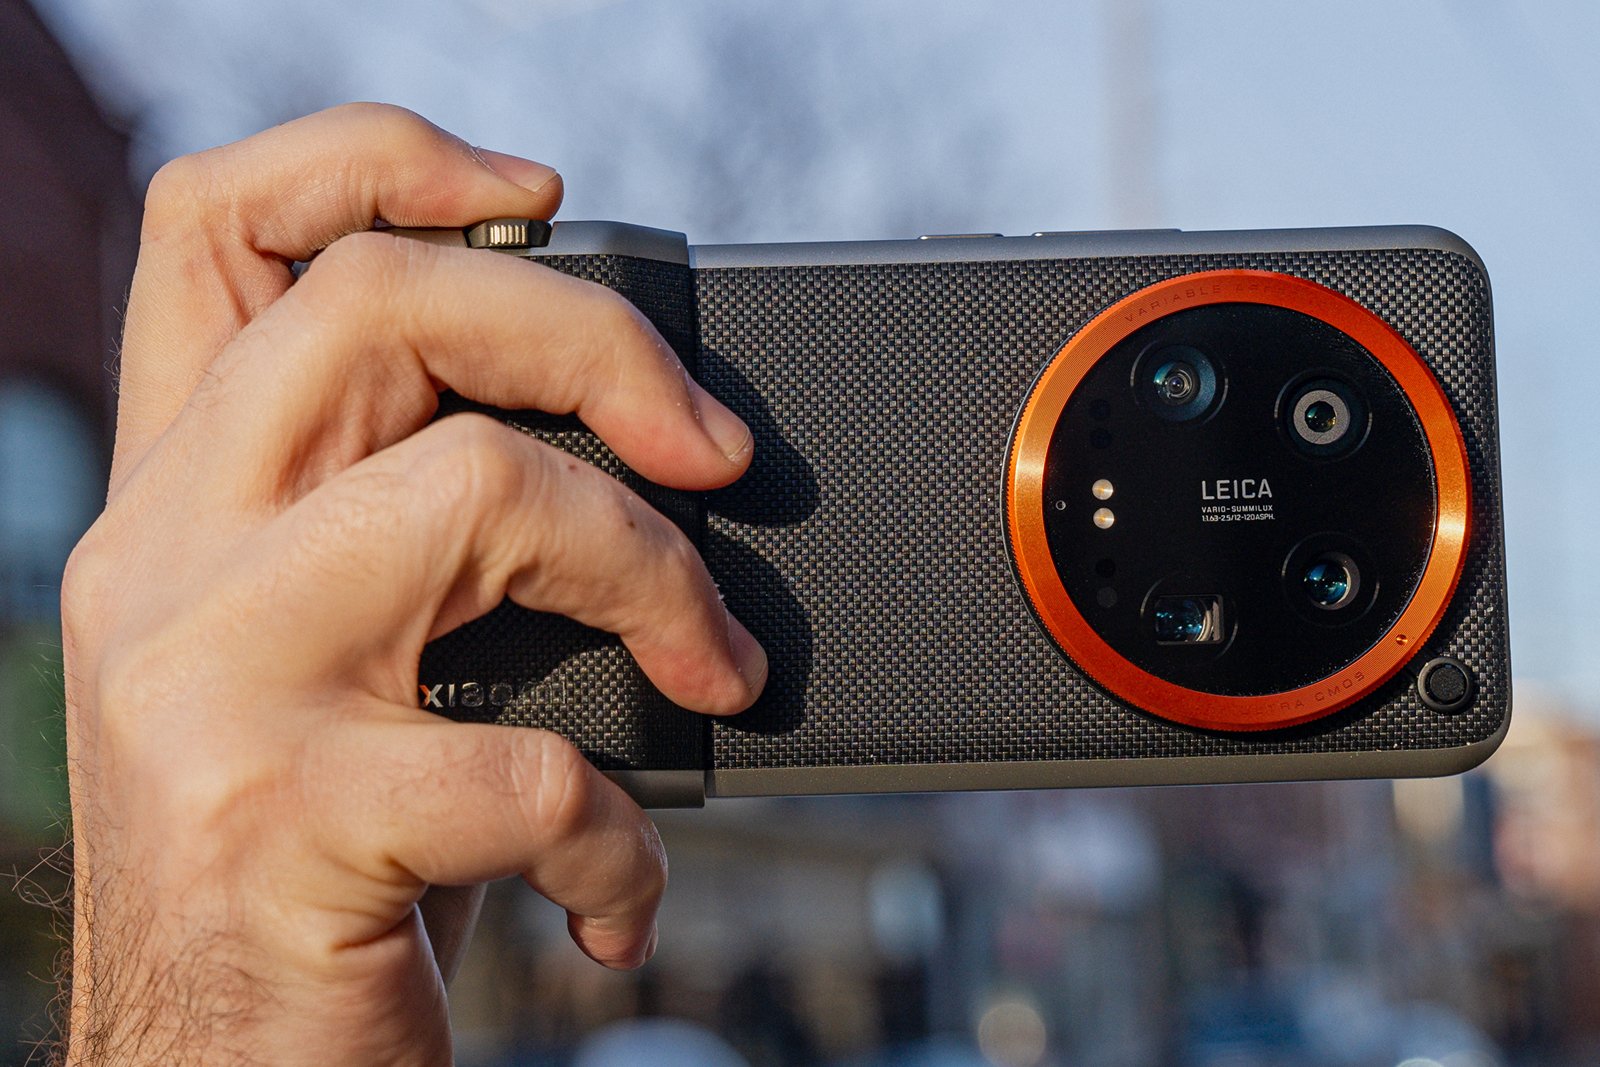 A hand holding a smartphone with a large black and red camera module labeled "leica" on the back, displayed against an outdoor blurred background.